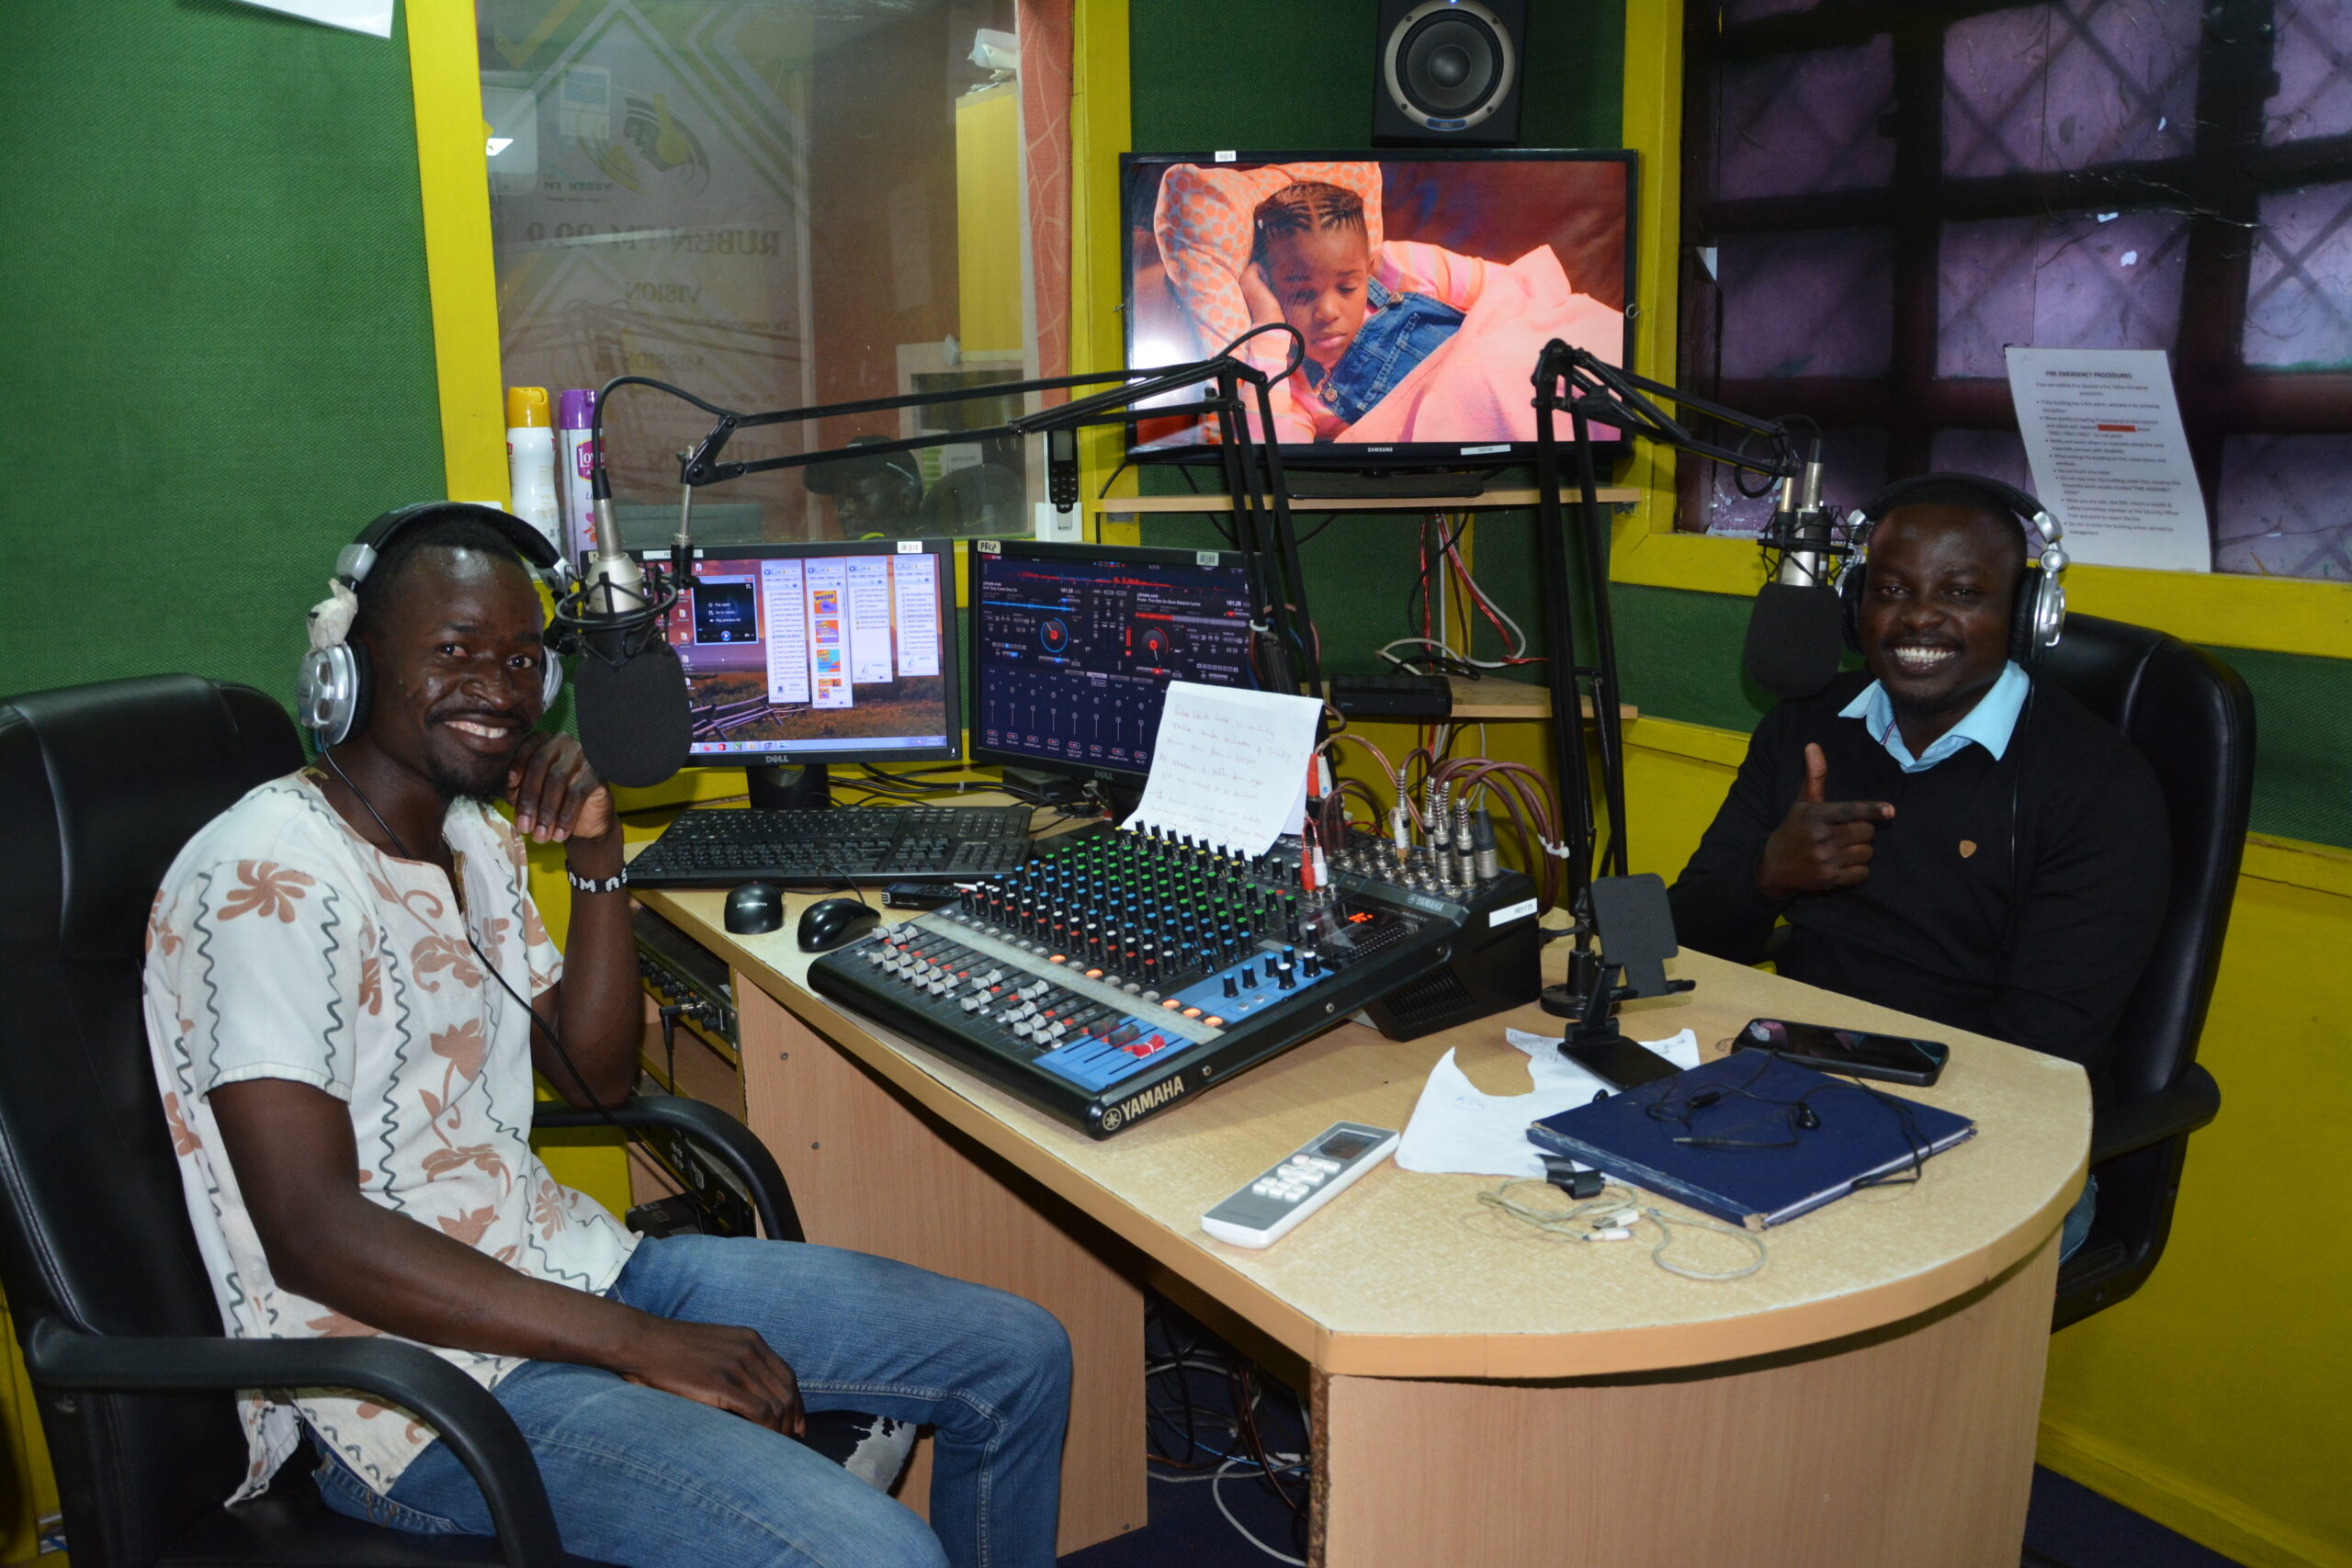 John and Bosco, hosts of the evening youth show at Ruben FM.